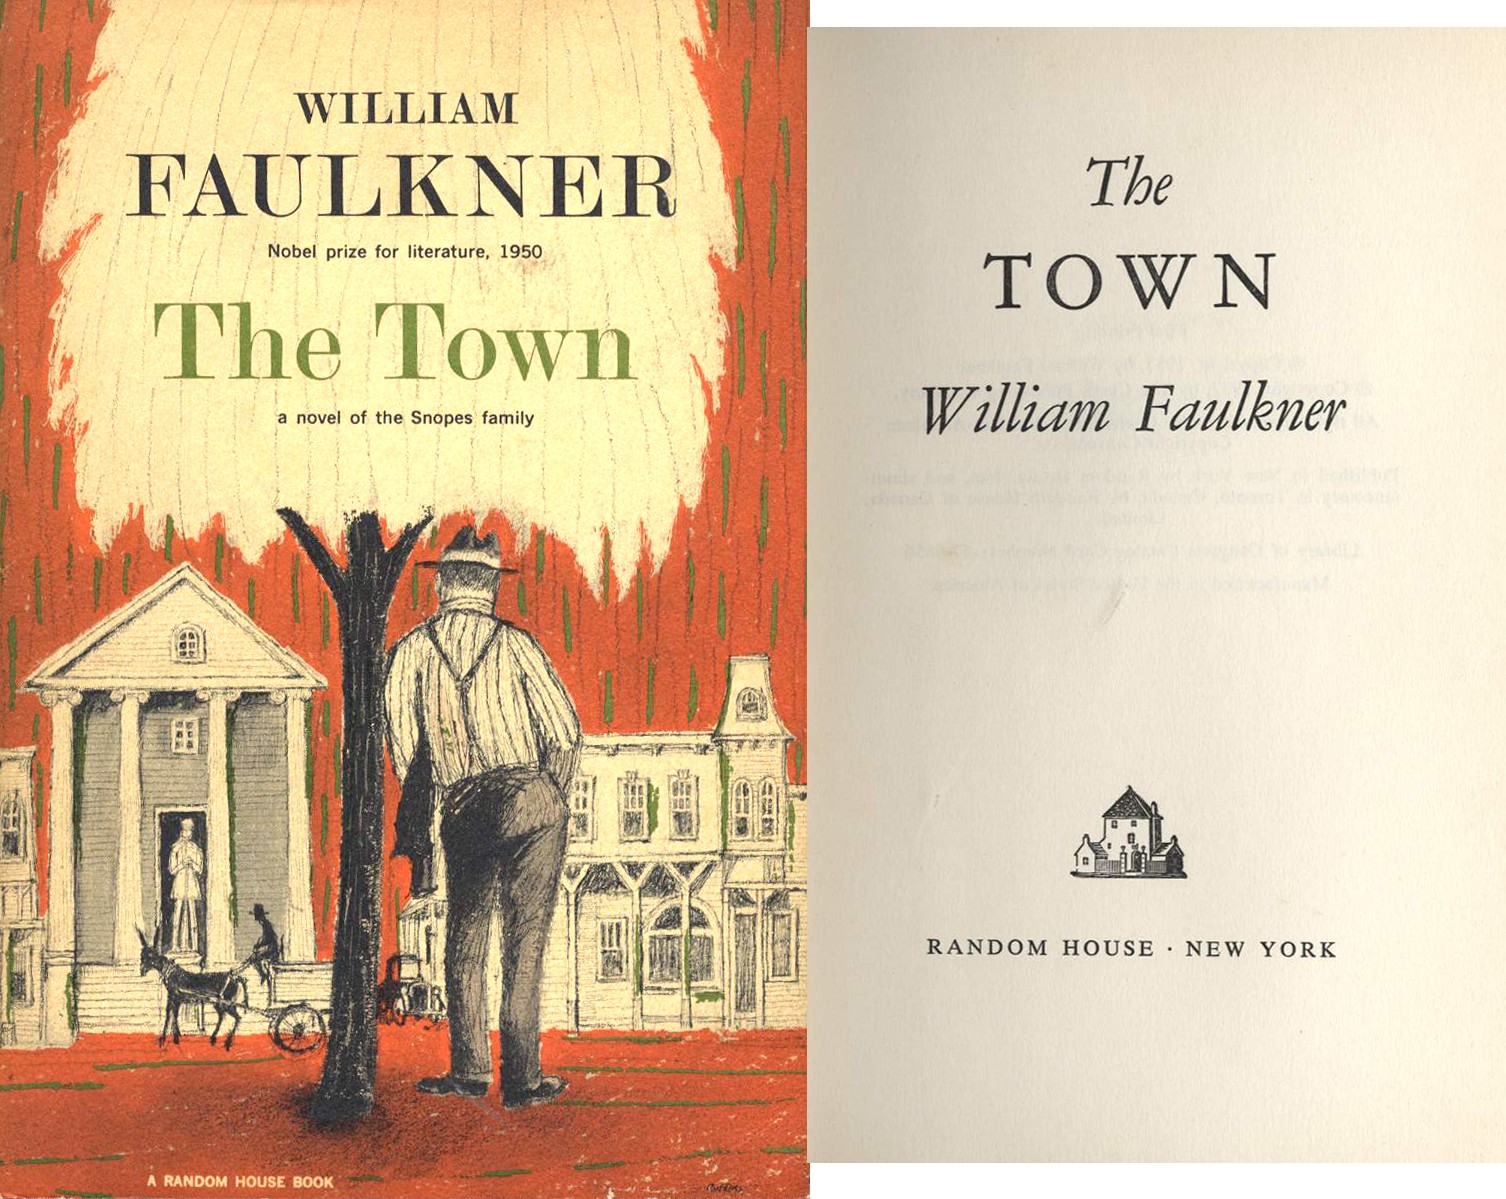 William Faulkner first edition Rare First Edition of "The Town: A Novel of the Snopes Family" by William Faulkner -- With Original Dust Wrapper